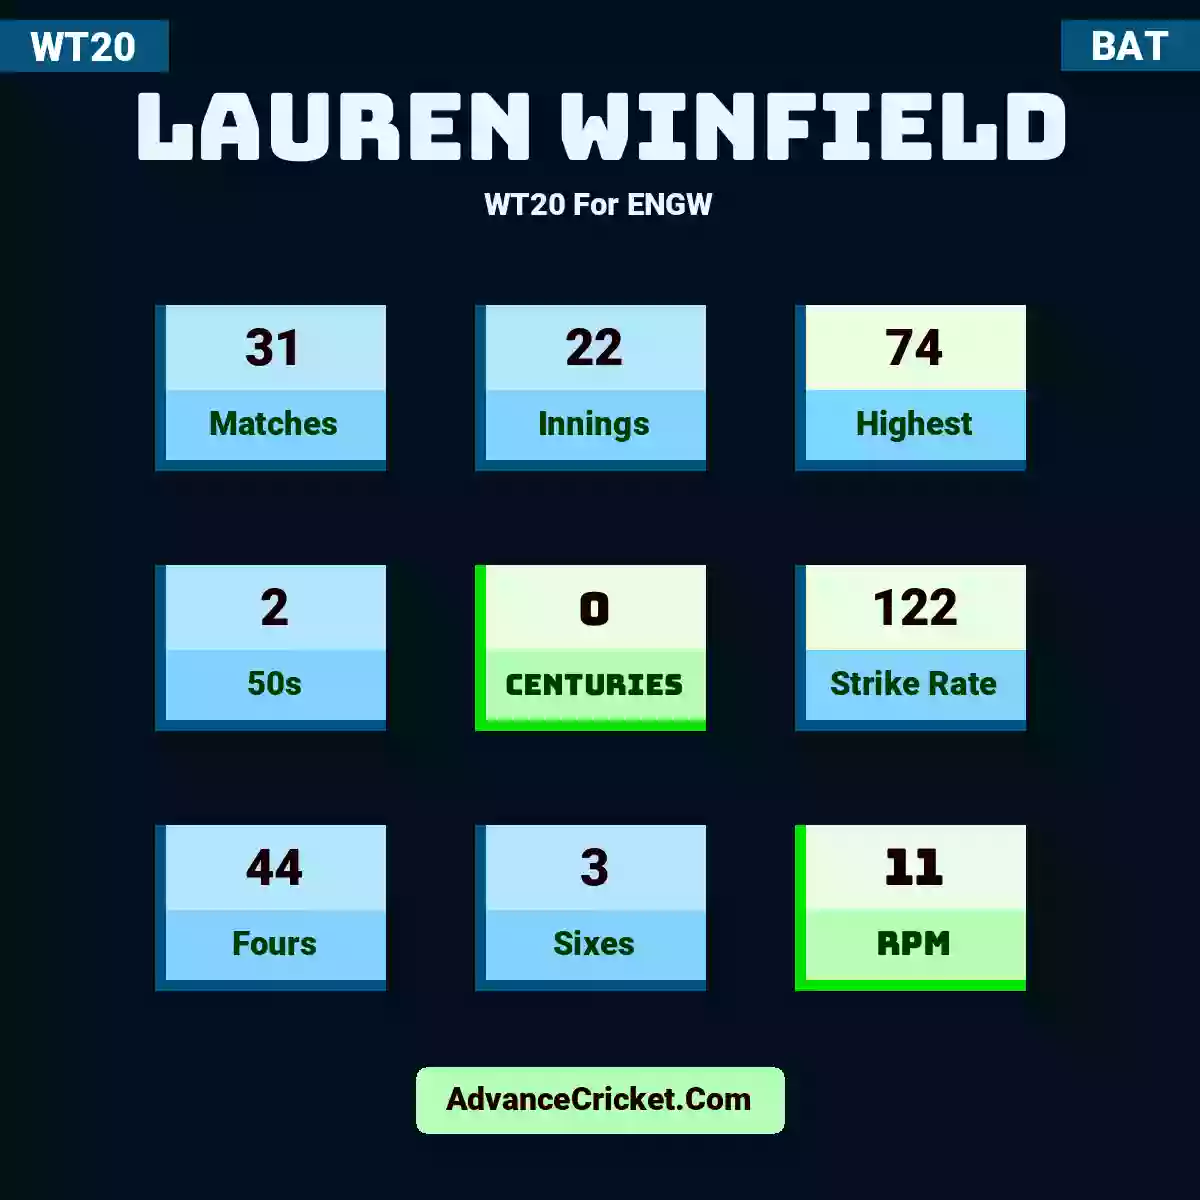 Lauren Winfield WT20  For ENGW, Lauren Winfield played 31 matches, scored 74 runs as highest, 2 half-centuries, and 0 centuries, with a strike rate of 122. L.Winfield hit 44 fours and 3 sixes, with an RPM of 11.